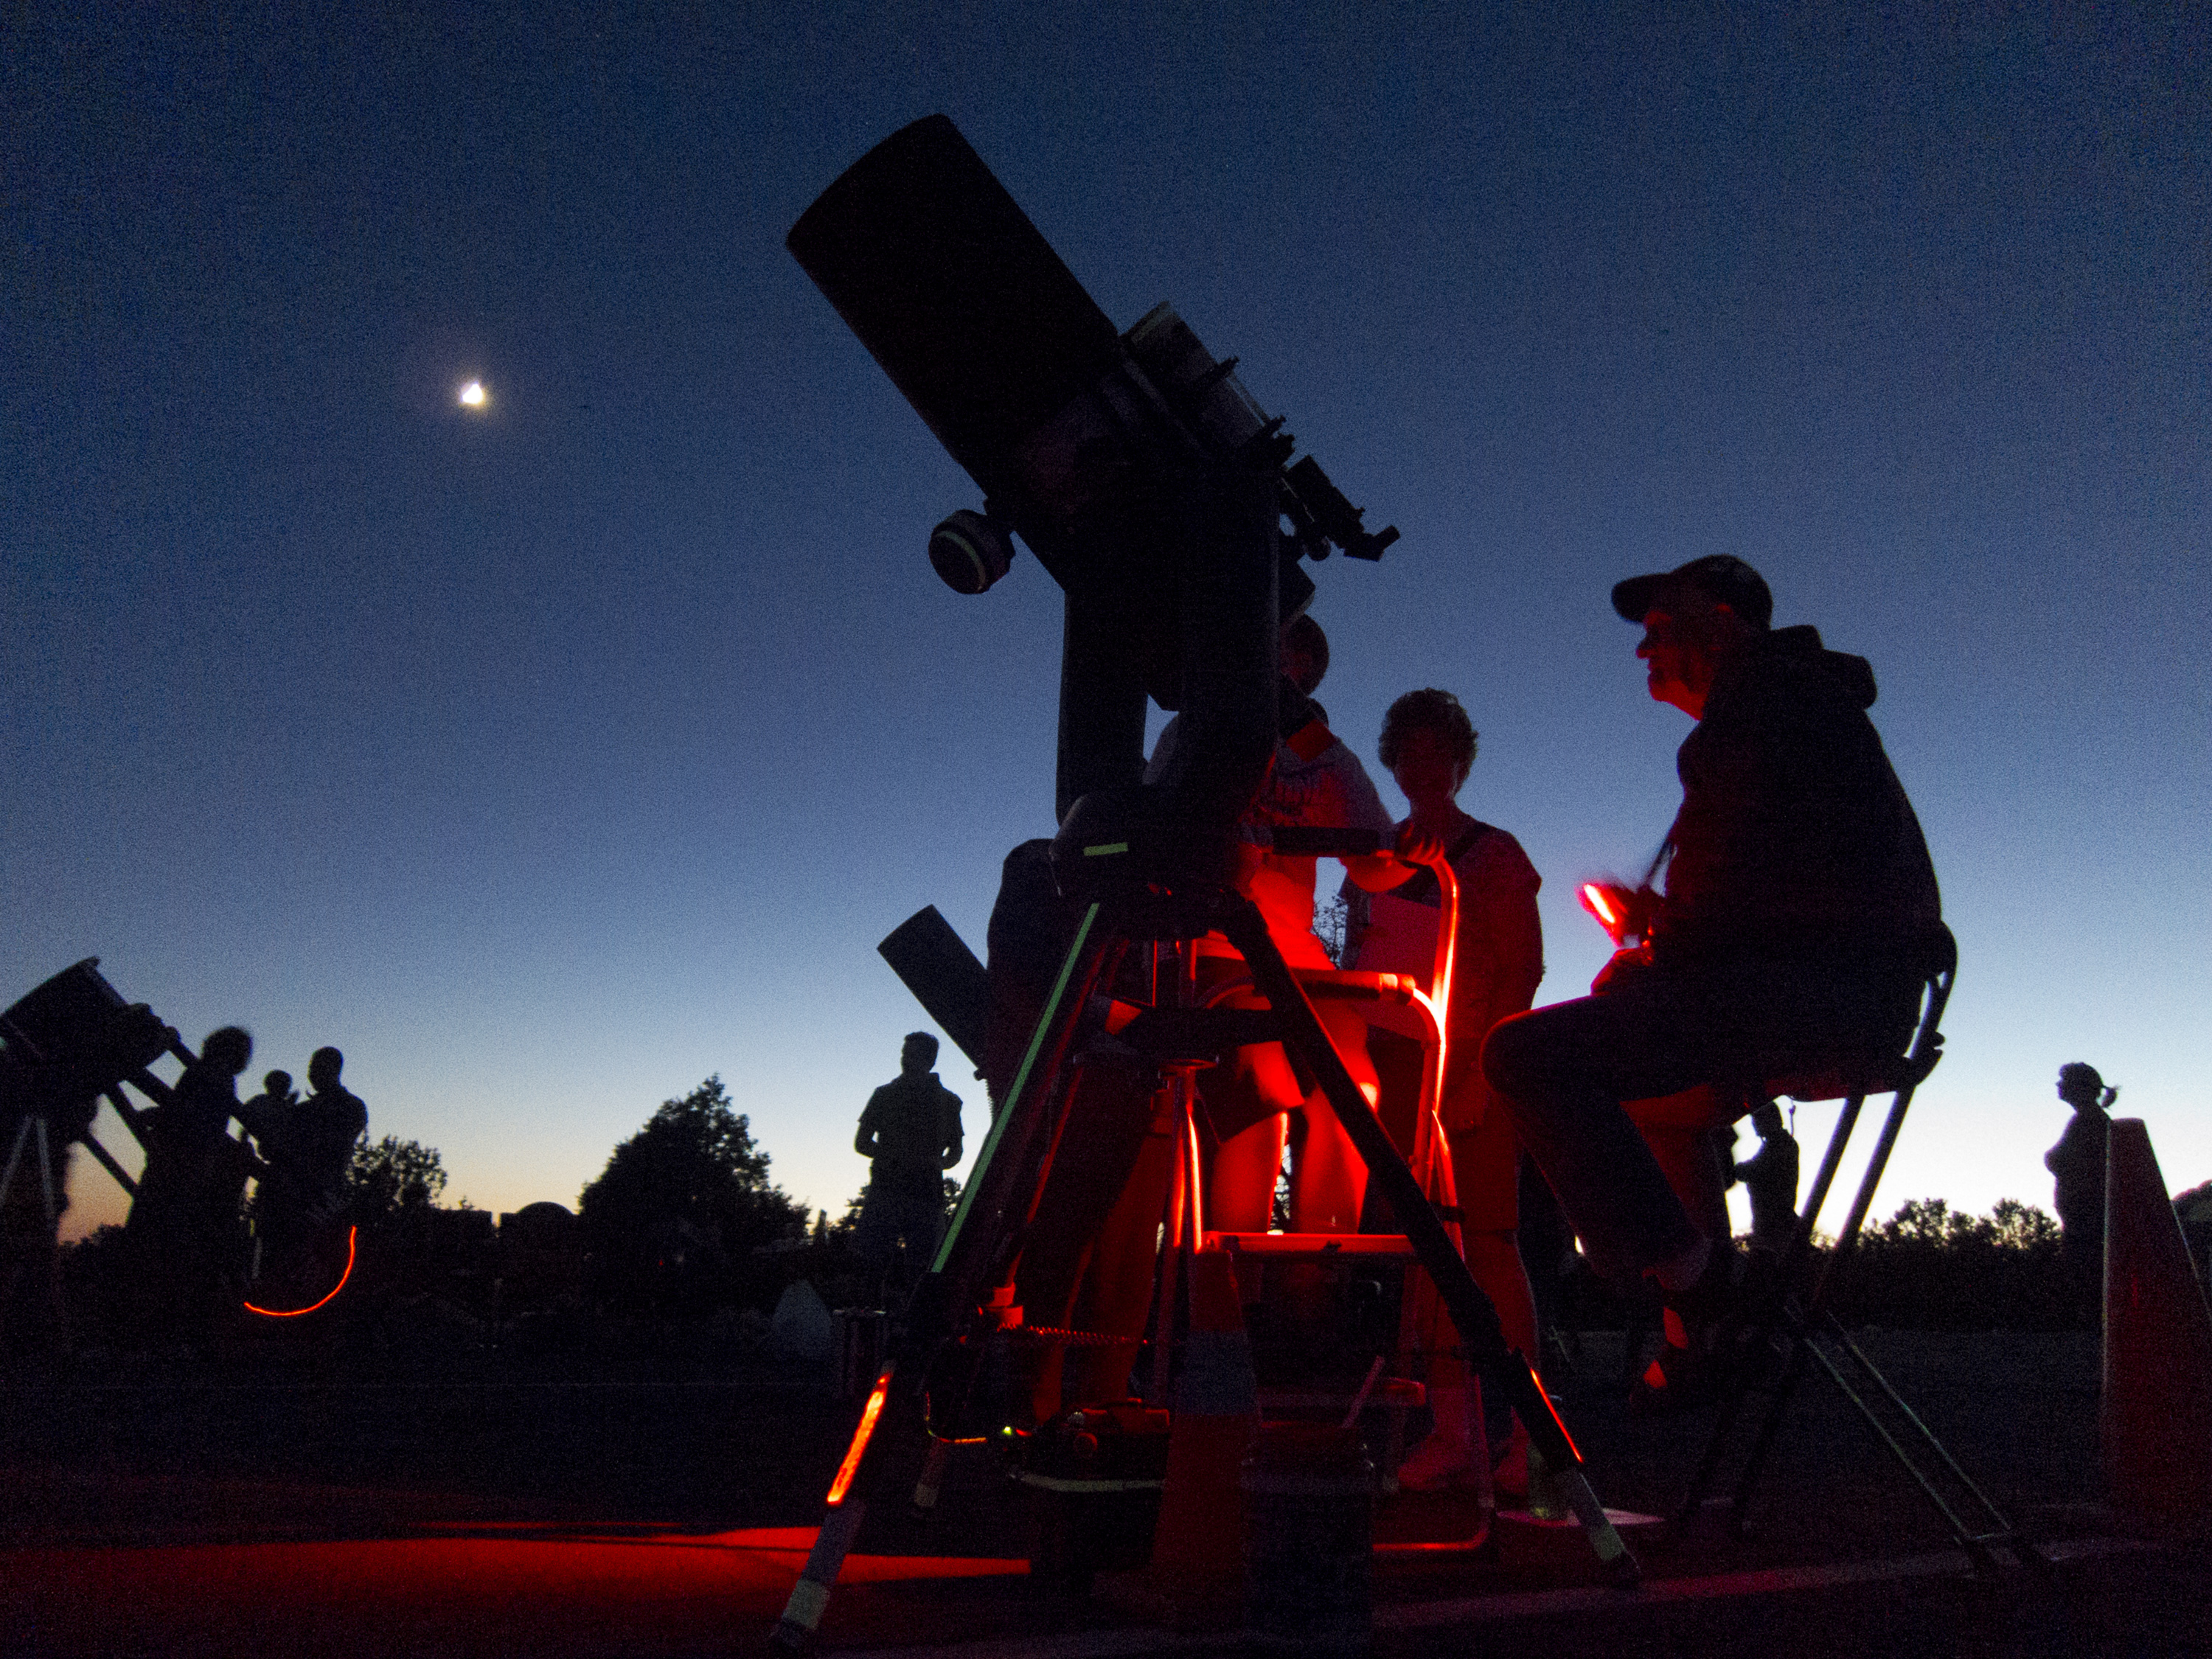 Grand Canyon Star Party to return with onsite event featuring speakers